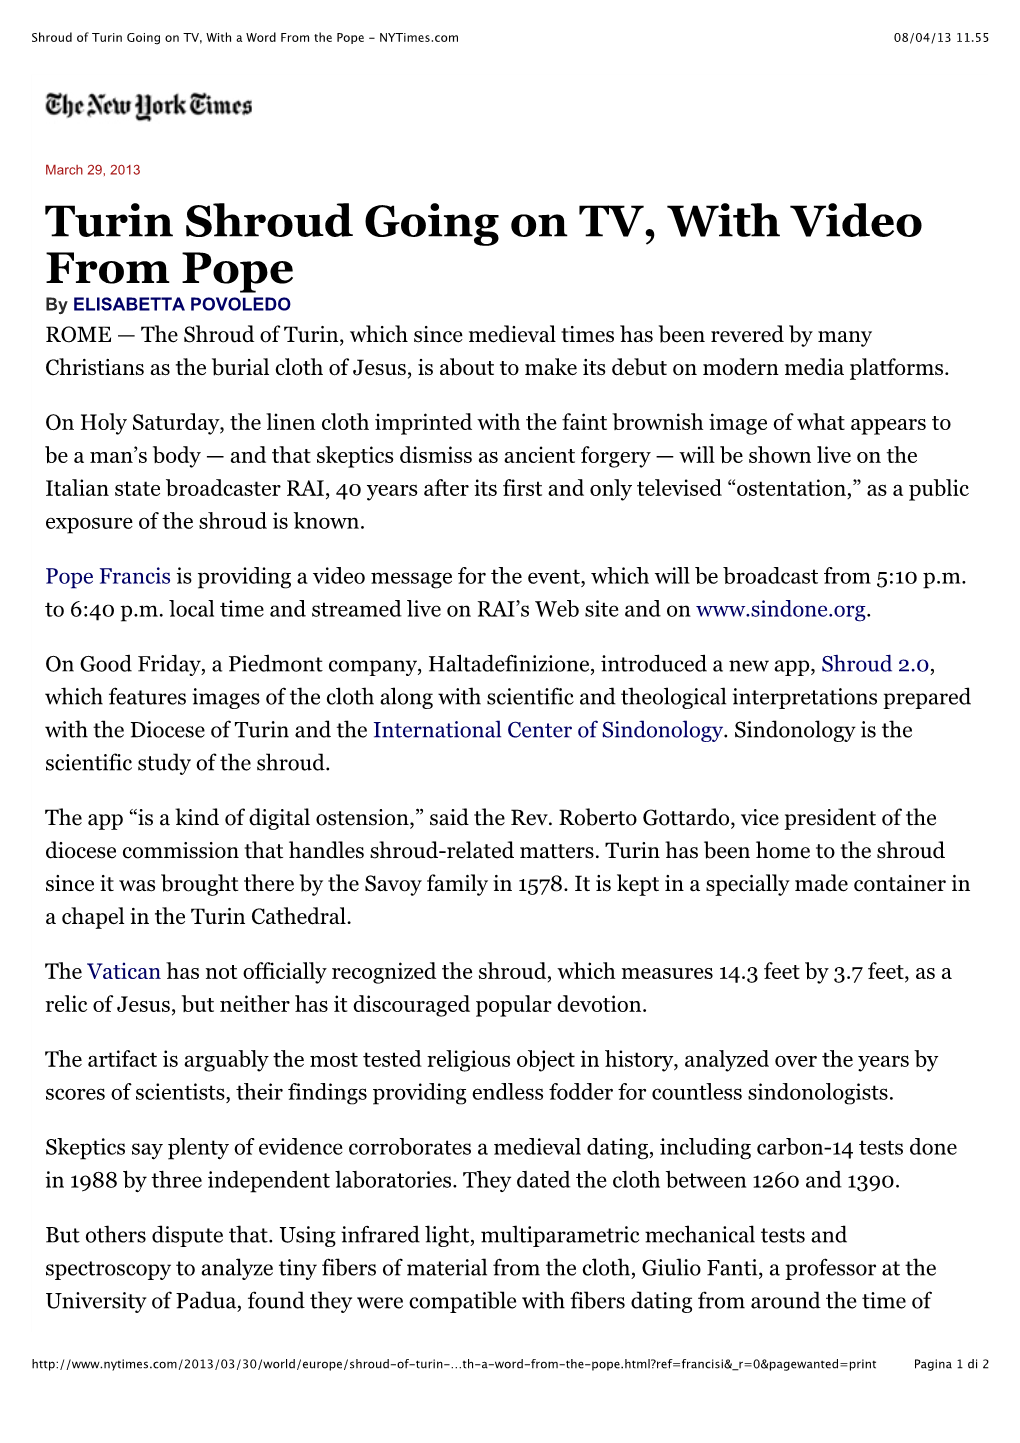 Shroud of Turin Going on TV, with a Word from the Pope - Nytimes.Com 08/04/13 11.55